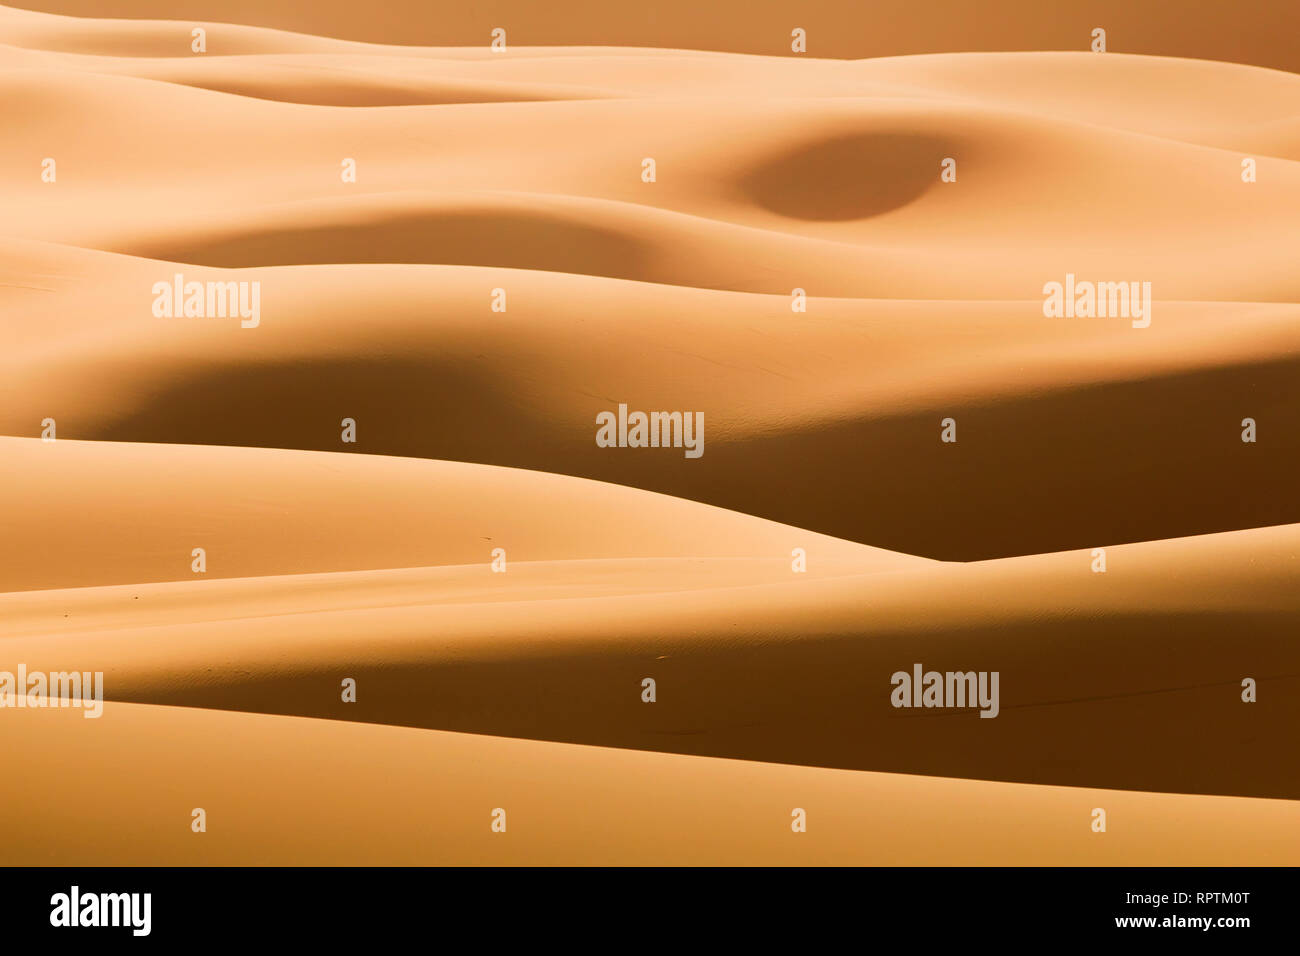 Abstract wave pattern of sand dune ranges in endless skyless landscape in the middle of arid sand desert on australian pacific coast in soft sun light Stock Photo